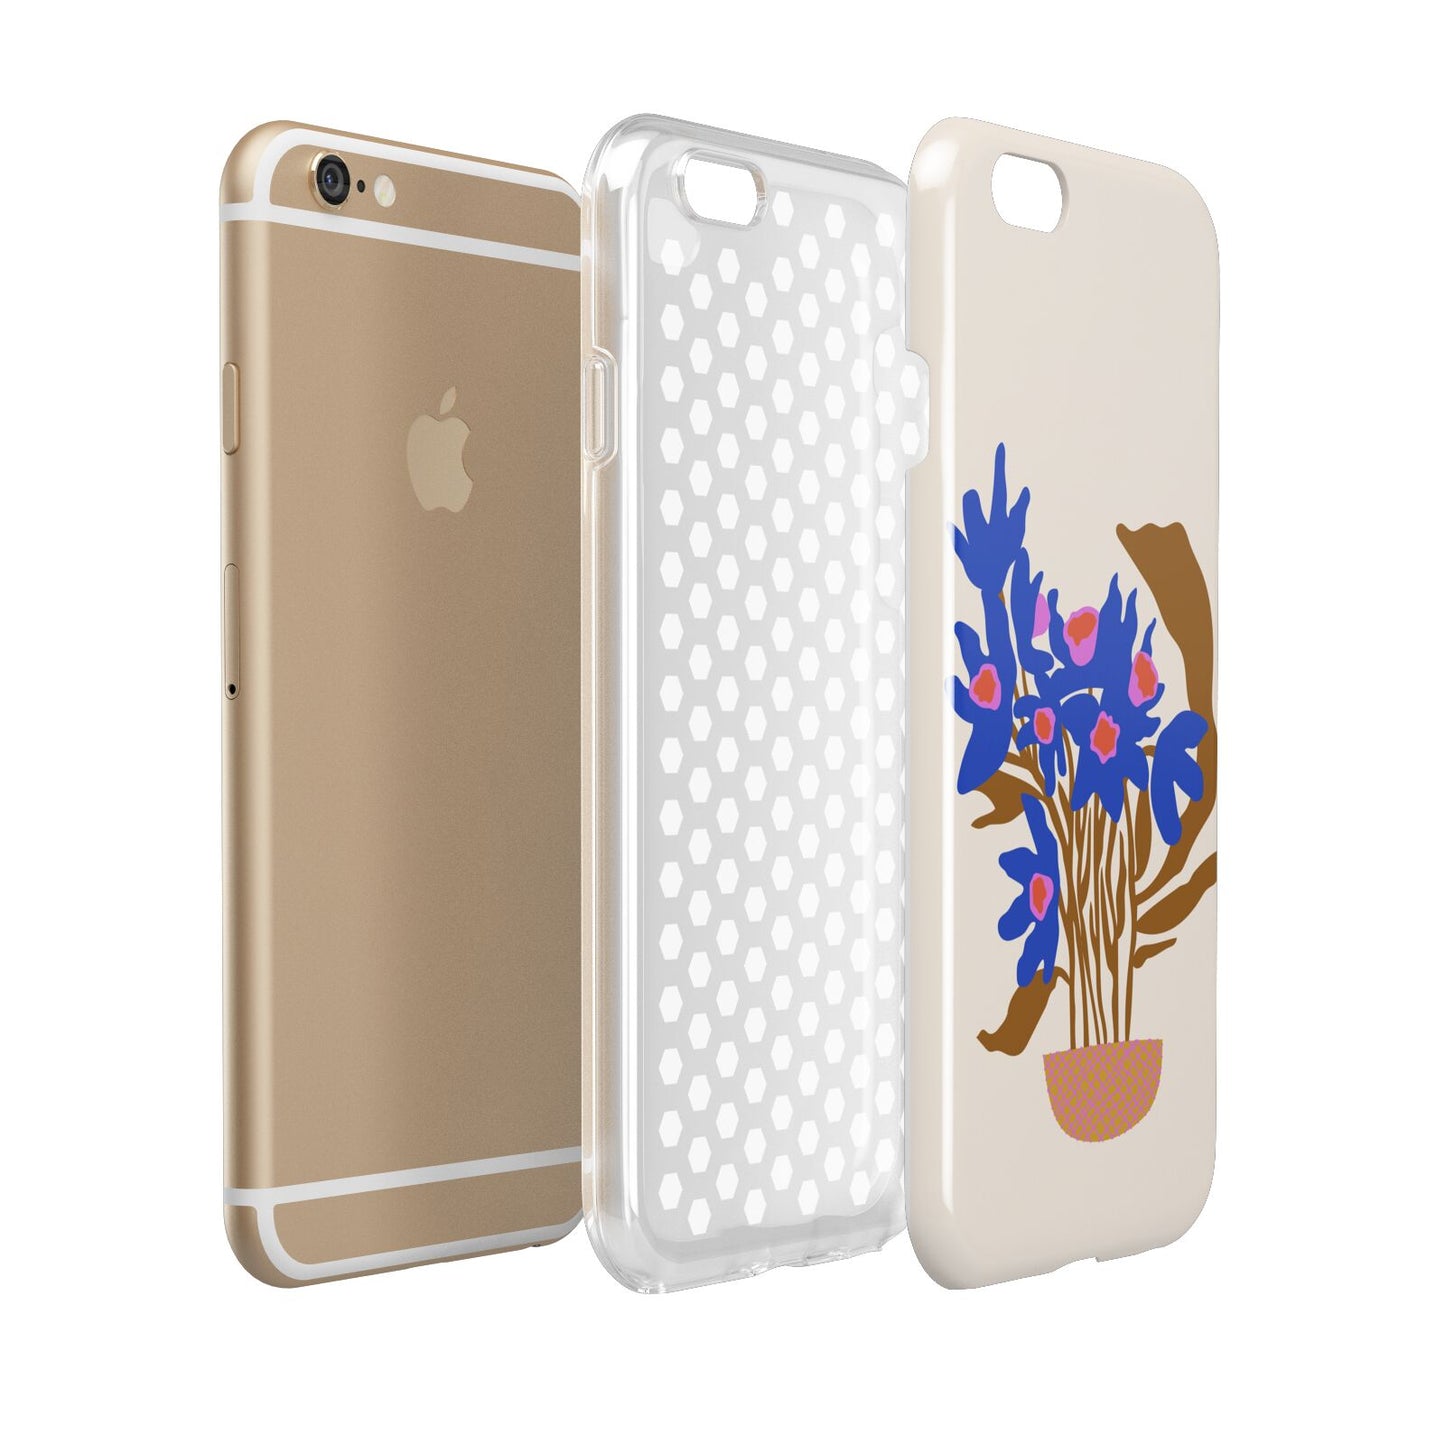 Flowers in a Vase Apple iPhone 6 3D Tough Case Expanded view